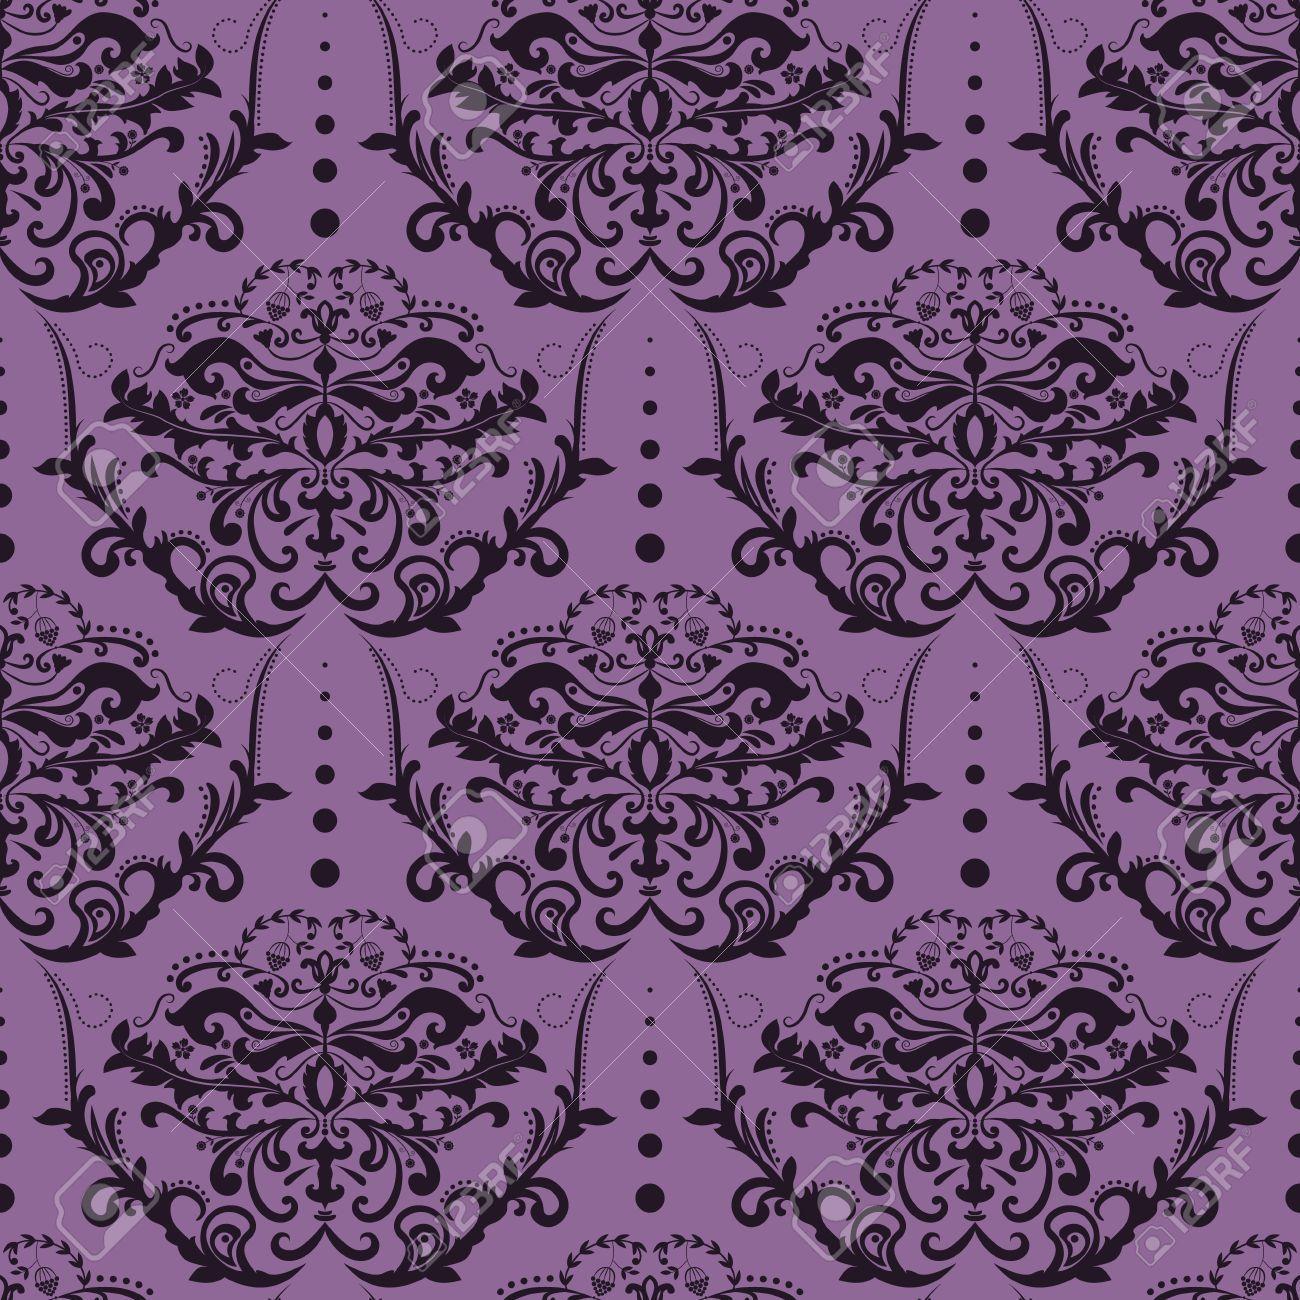 Damask Seamless Pattern Vector PNG Images Seamless Luxury Ornamental Background  Purple Damask Seamless Floral Pattern Abstract Antique Background PNG  Image   Floral pattern vector Seamless pattern vector Abstract wallpaper  backgrounds